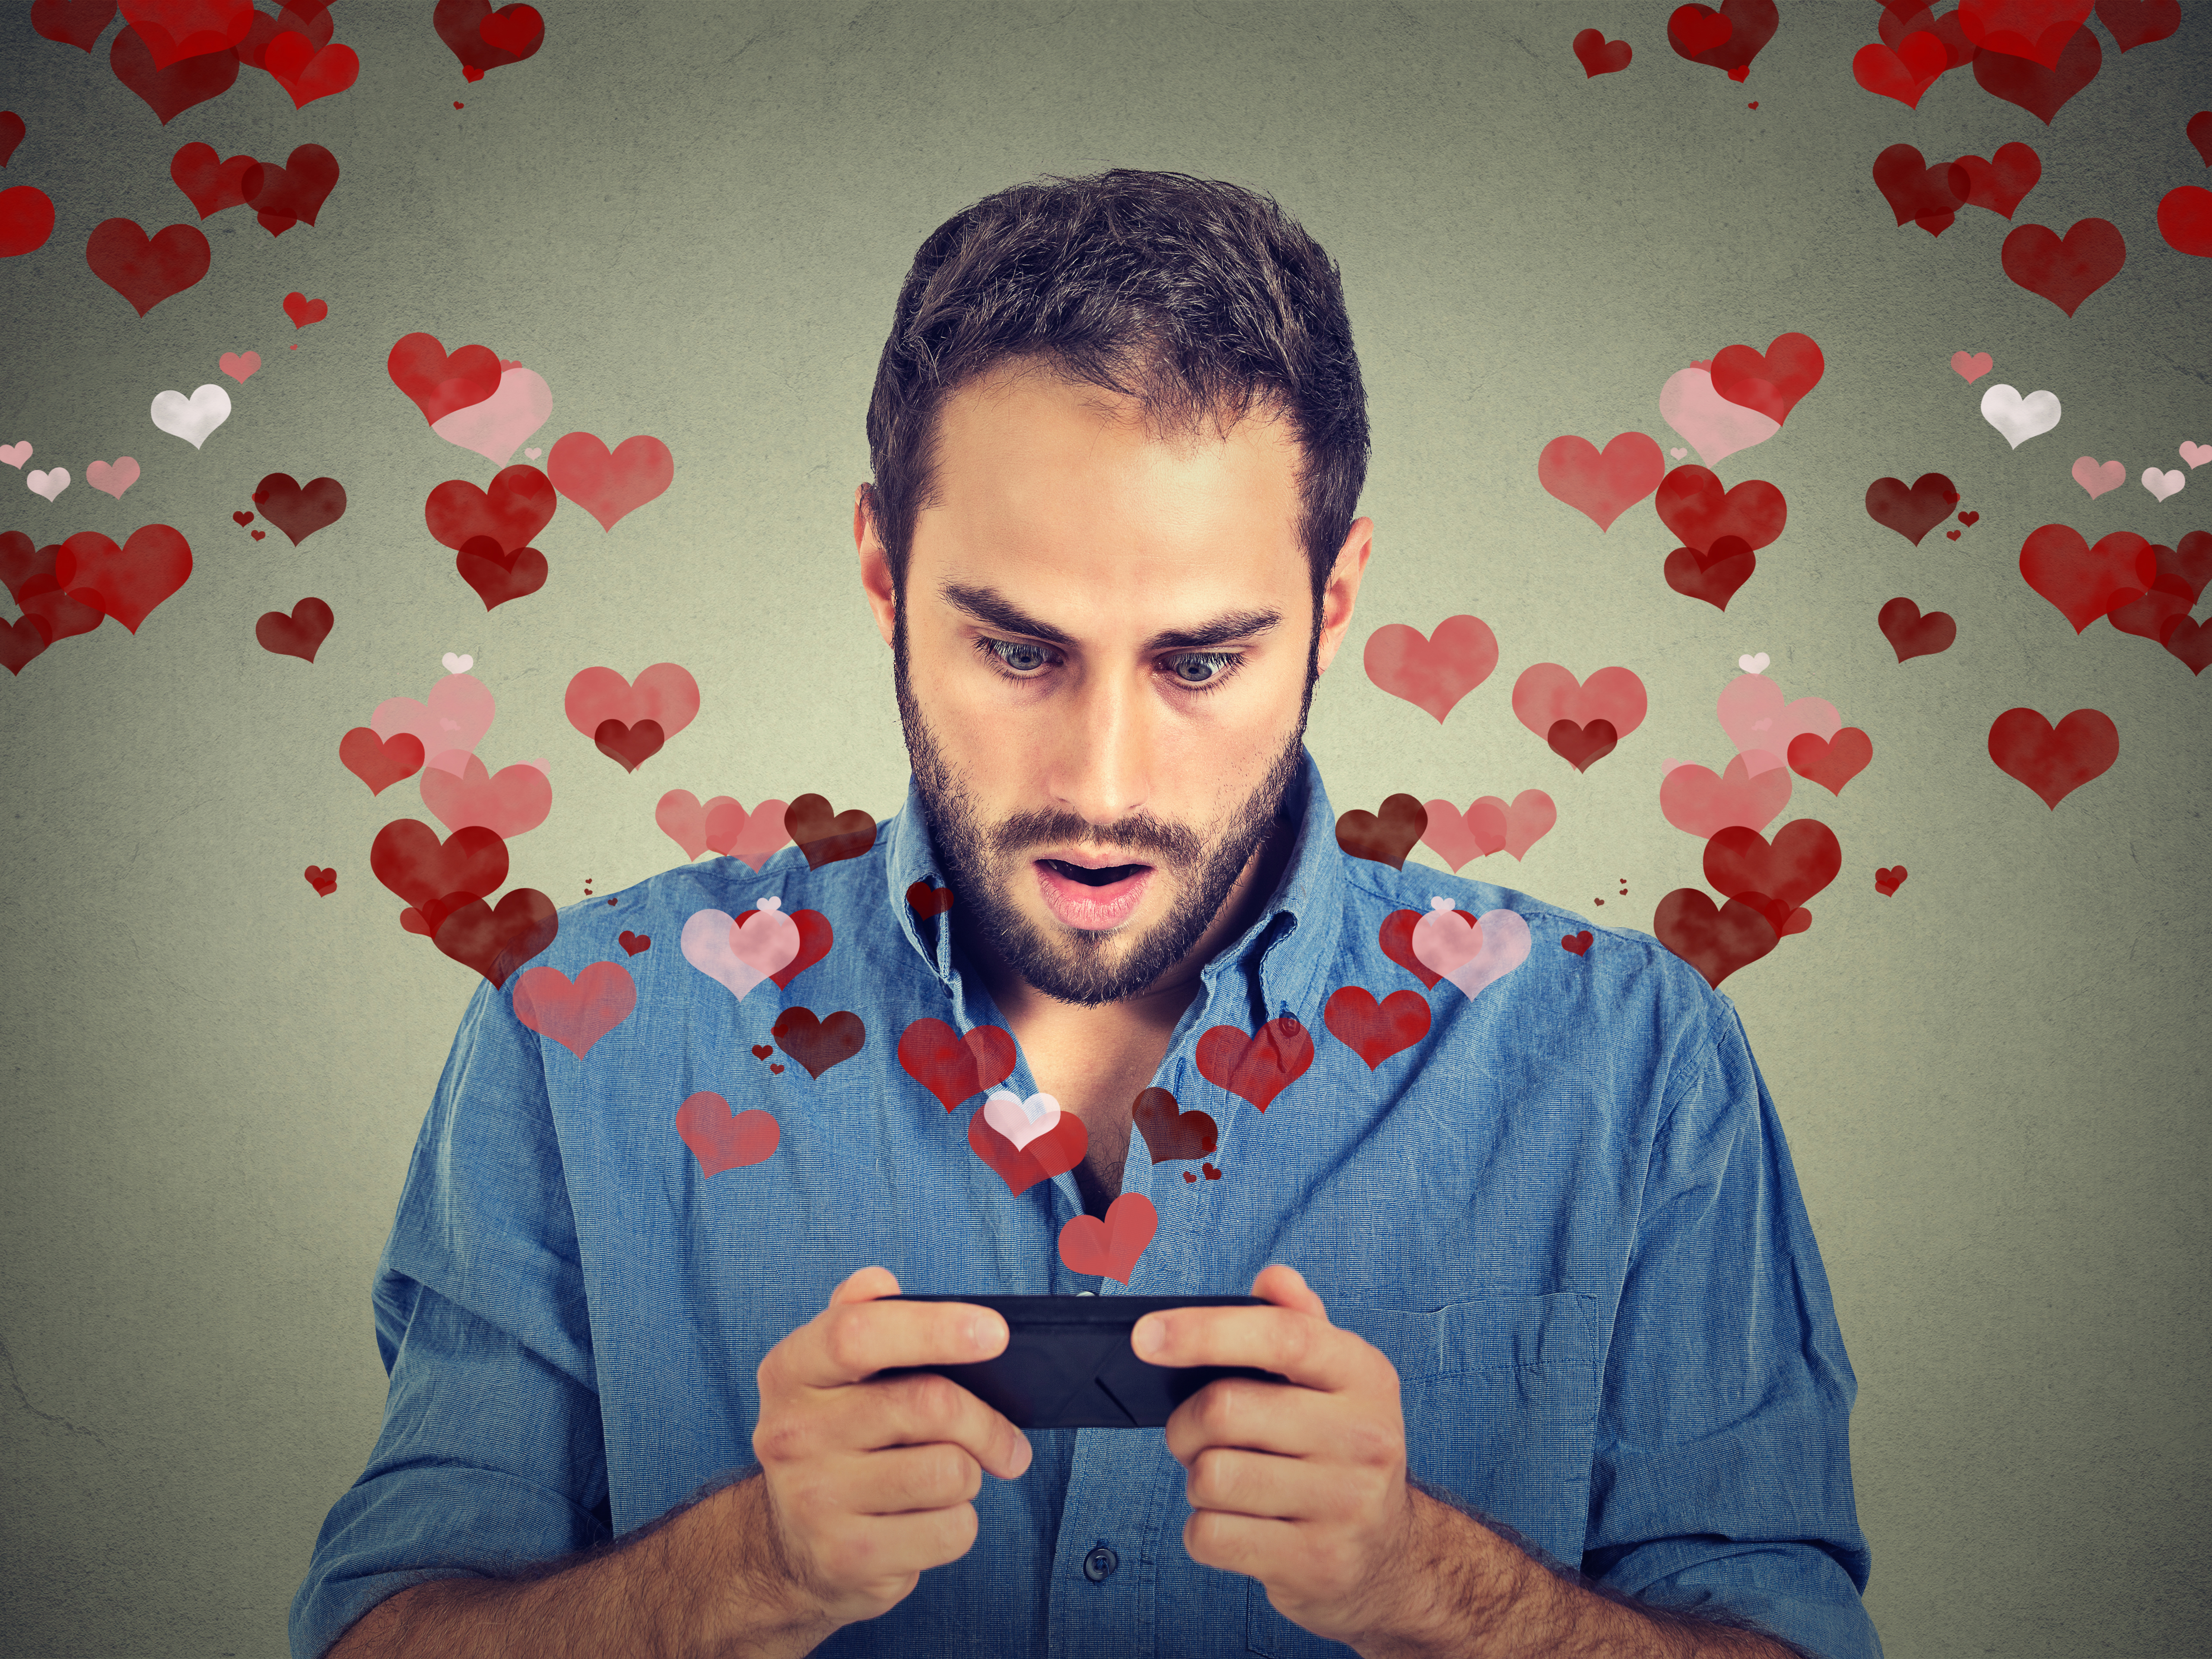 Online dating lines that work